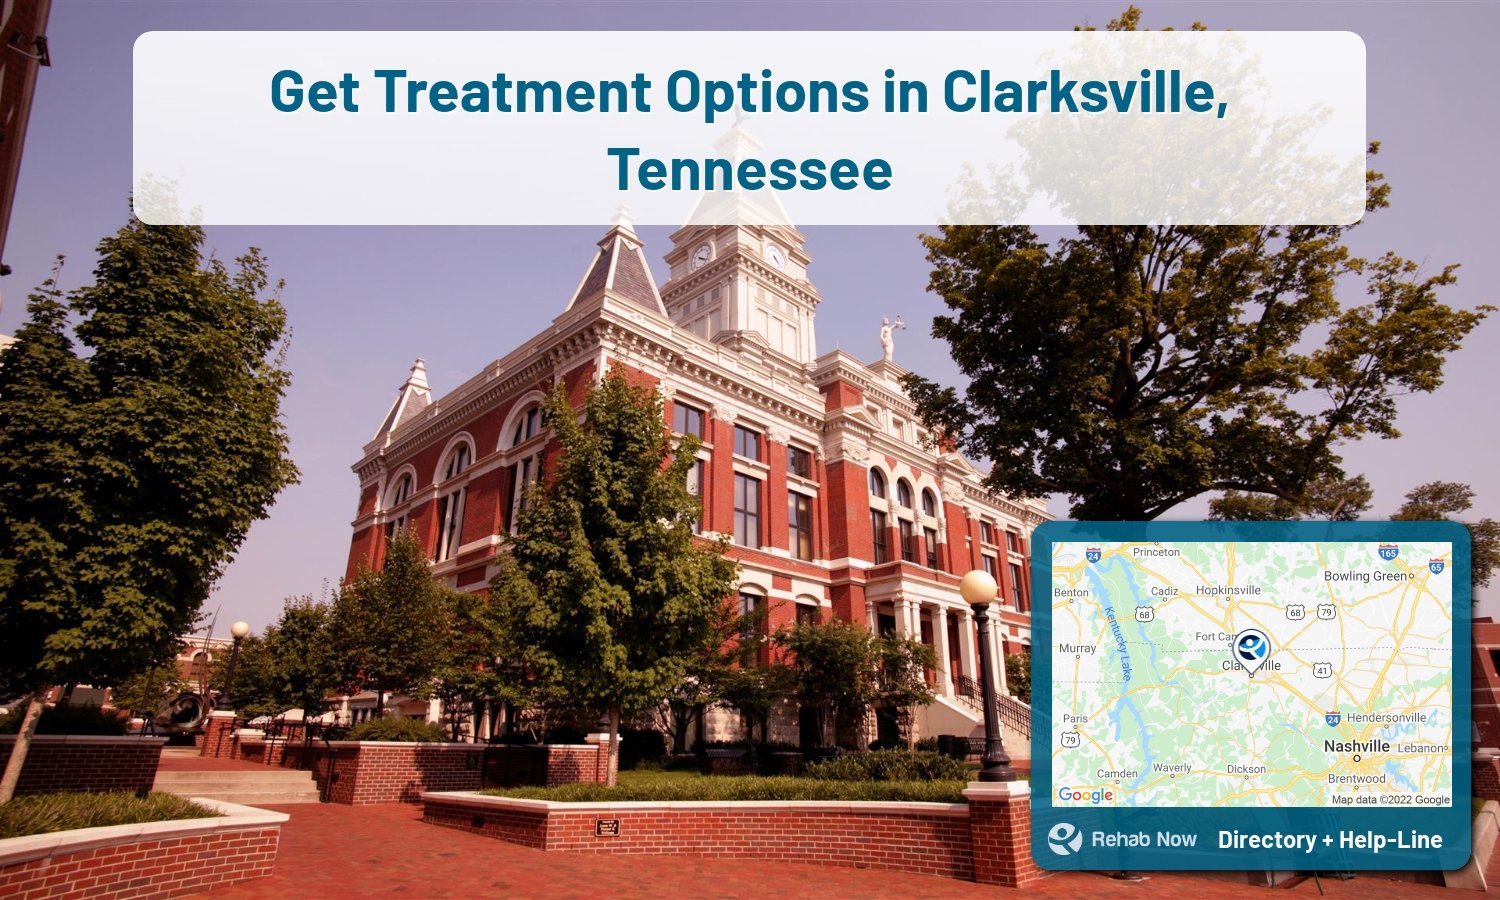 Clarksville, TN Treatment Centers. Find drug rehab in Clarksville, Tennessee, or detox and treatment programs. Get the right help now!